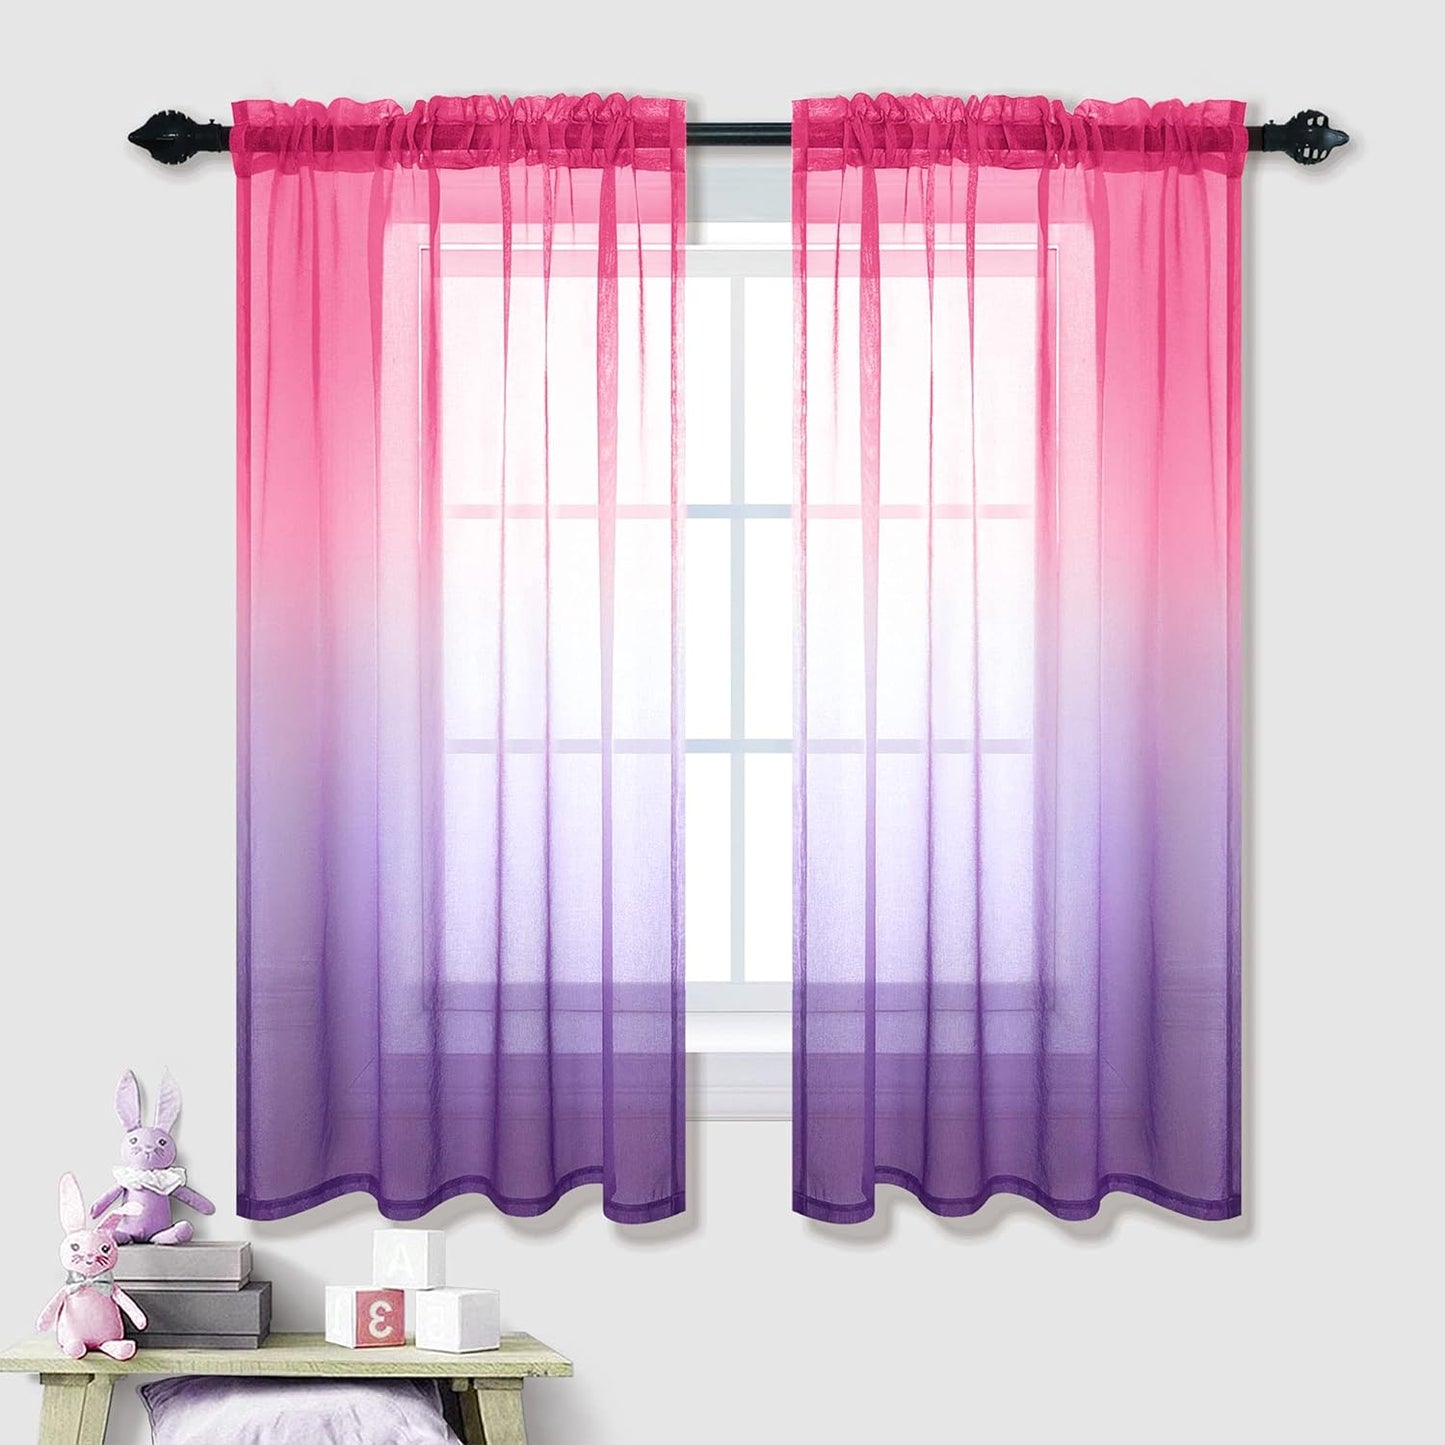 Kitchen Curtains Yellow Lemon and Light Grey Sheer Bathroom Window Curtains 42 X 45 Inch Length Sunflower Yellow and Gray  PITALK TEXTILE Pink And Purple 42X45 